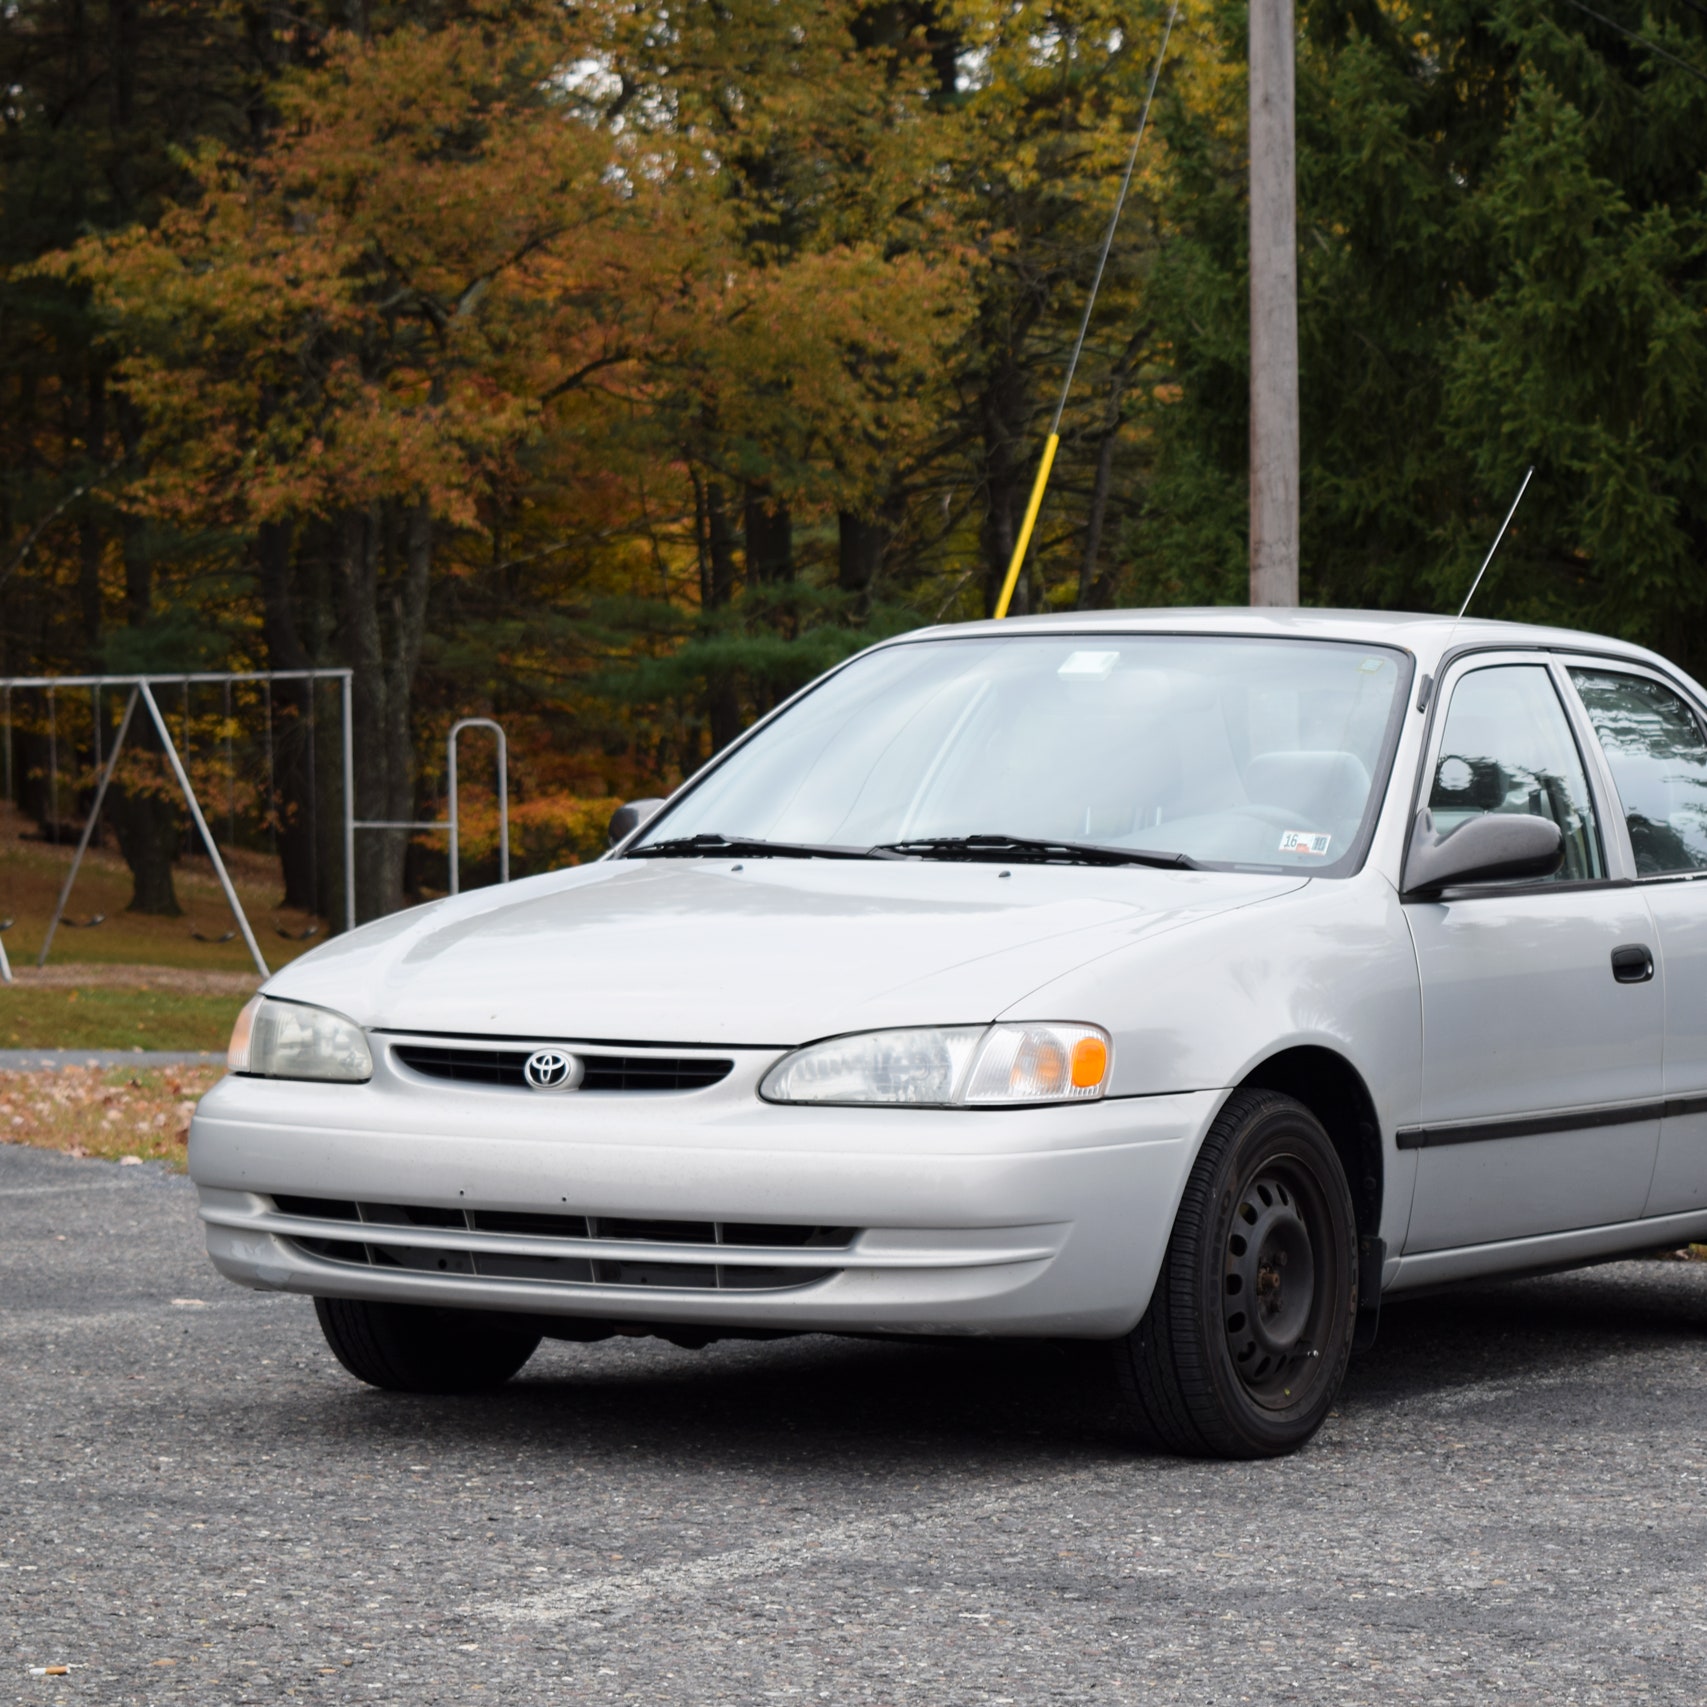 The Semiotics of a 1999 Toyota Corolla | The New Yorker